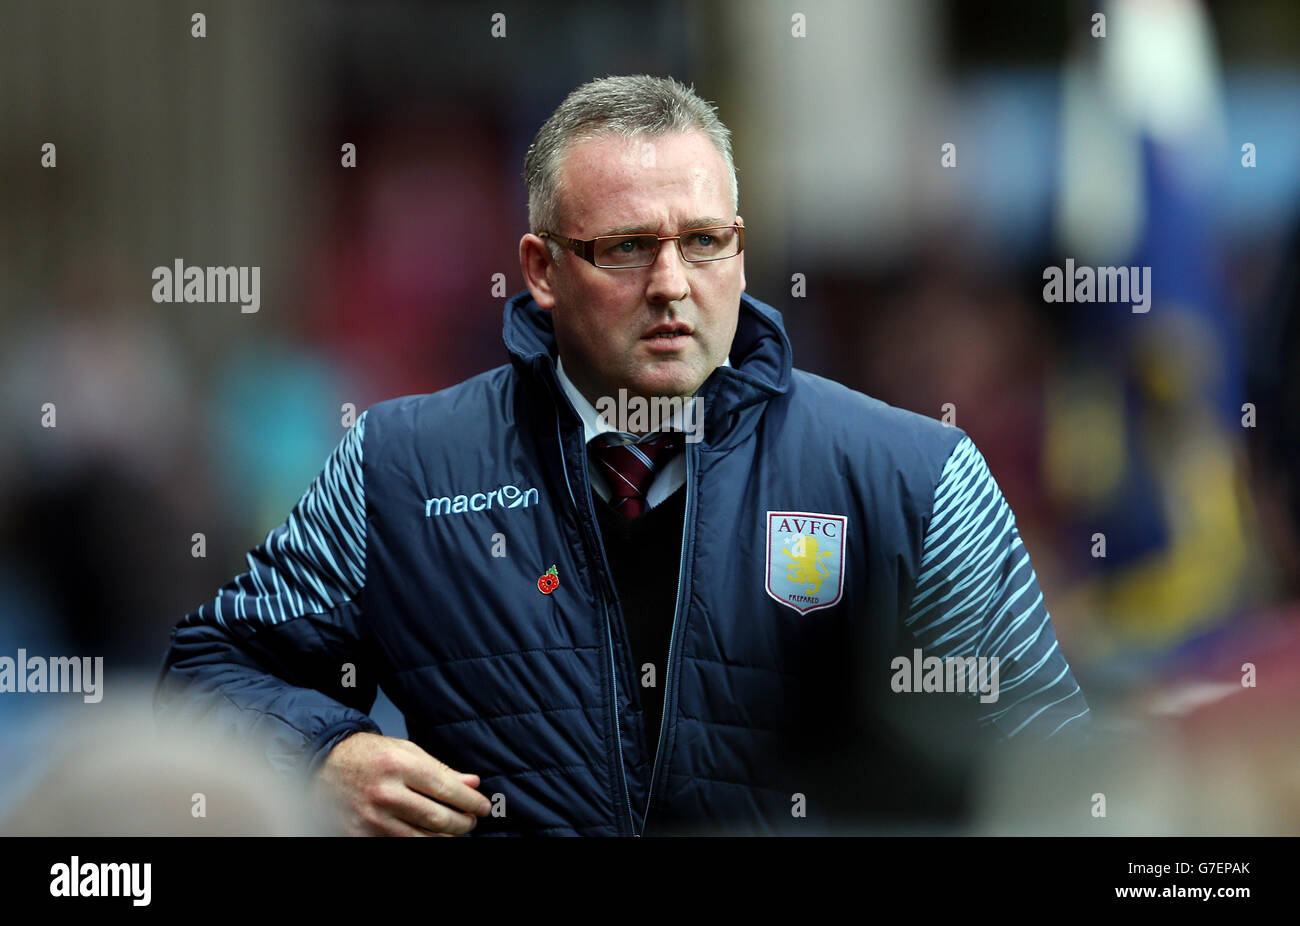 Aston Villa manager Paul Lambert during the Barclays Premier League match at Villa Park, Birmingham. PRESS ASSOCIATION Photo. Picture date: Sunday November 2nd, 2014. See PA story SOCCER Villa. Photo credit should read David Davies/PA Wire. Maximum 45 images during a match. No video emulation or promotion as 'live'. No use in games, competitions, merchandise, betting or single club/player services. No use with unofficial audio, video, data, fixtures or club/league logos. Stock Photo